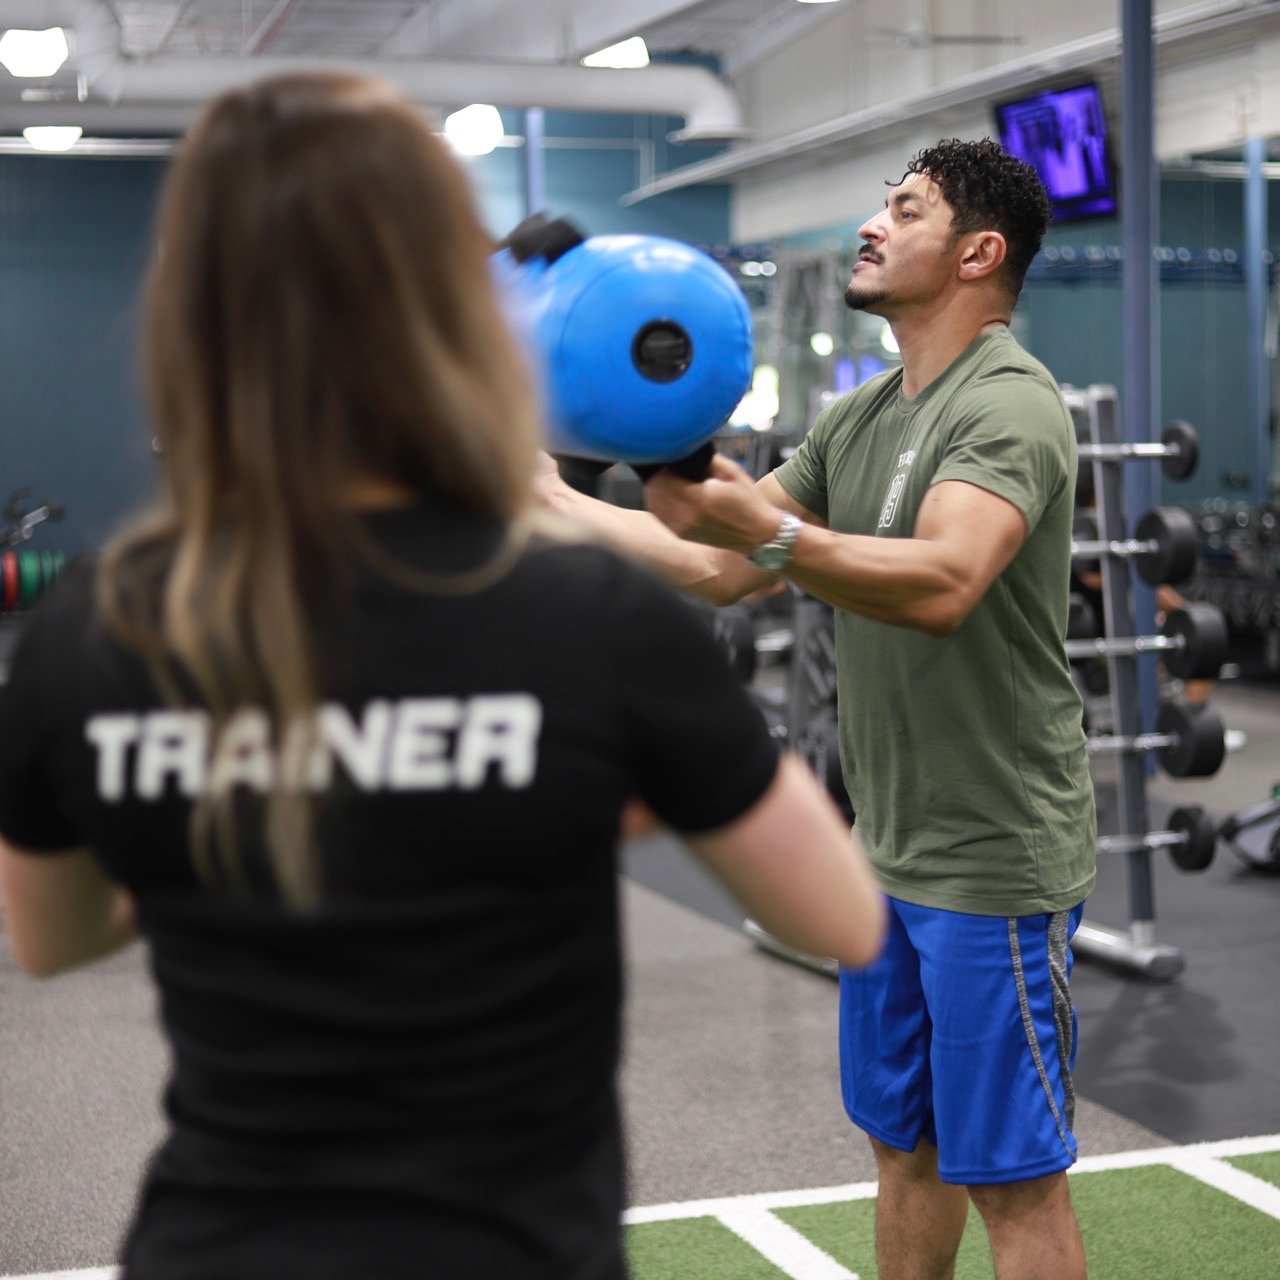 physical trainer working with client